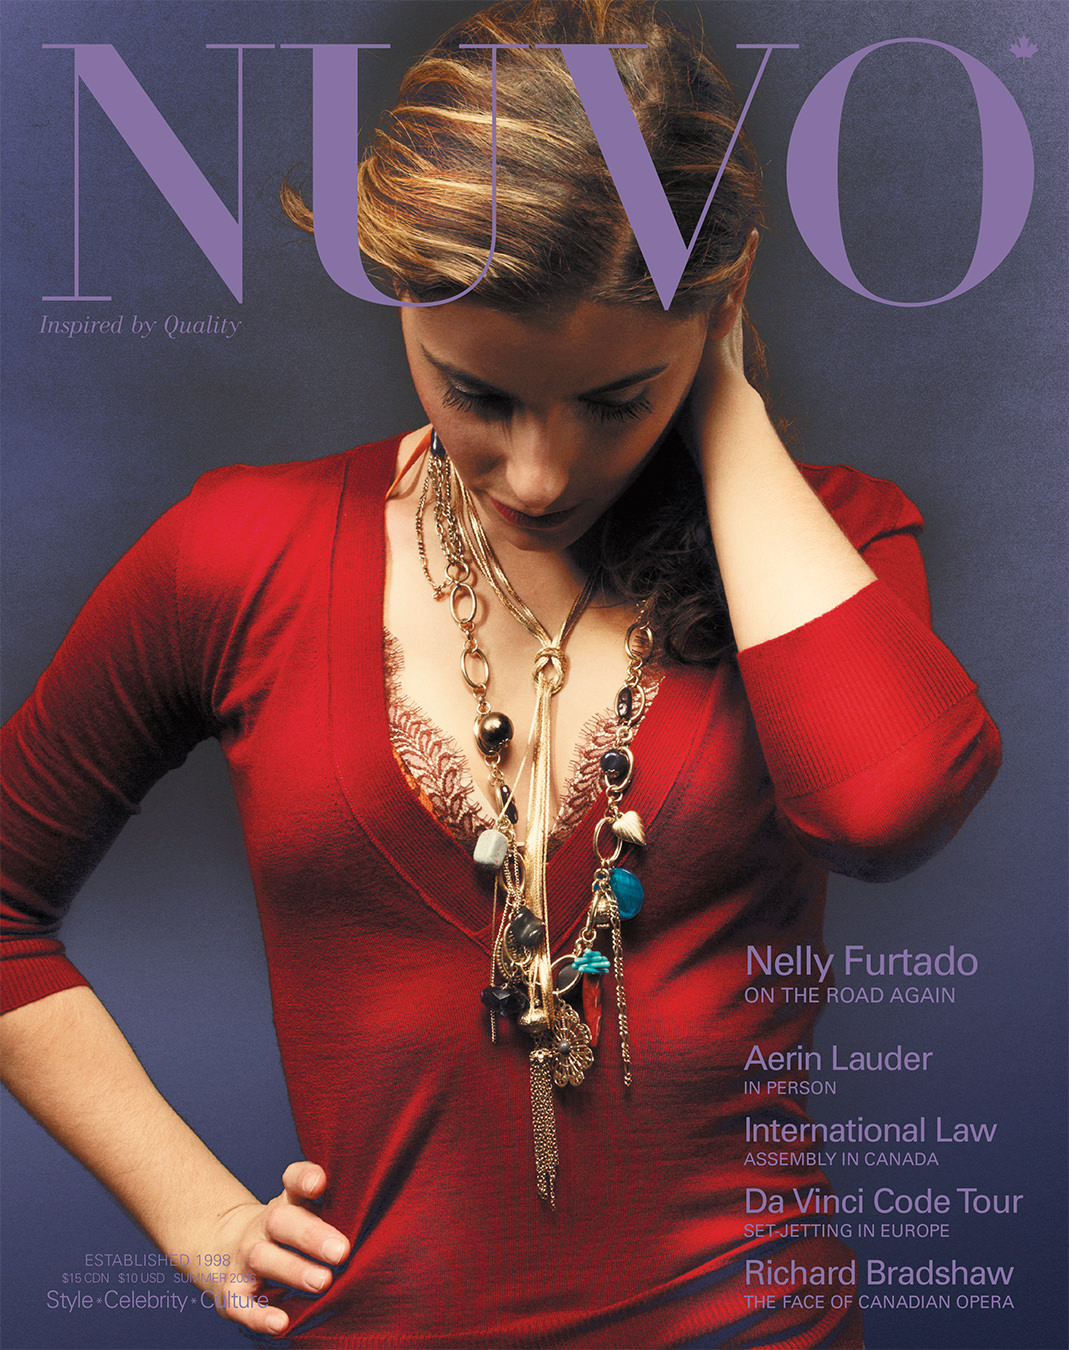 NUVO Magazine Summer 2006 Cover featuring Nelly Furtado